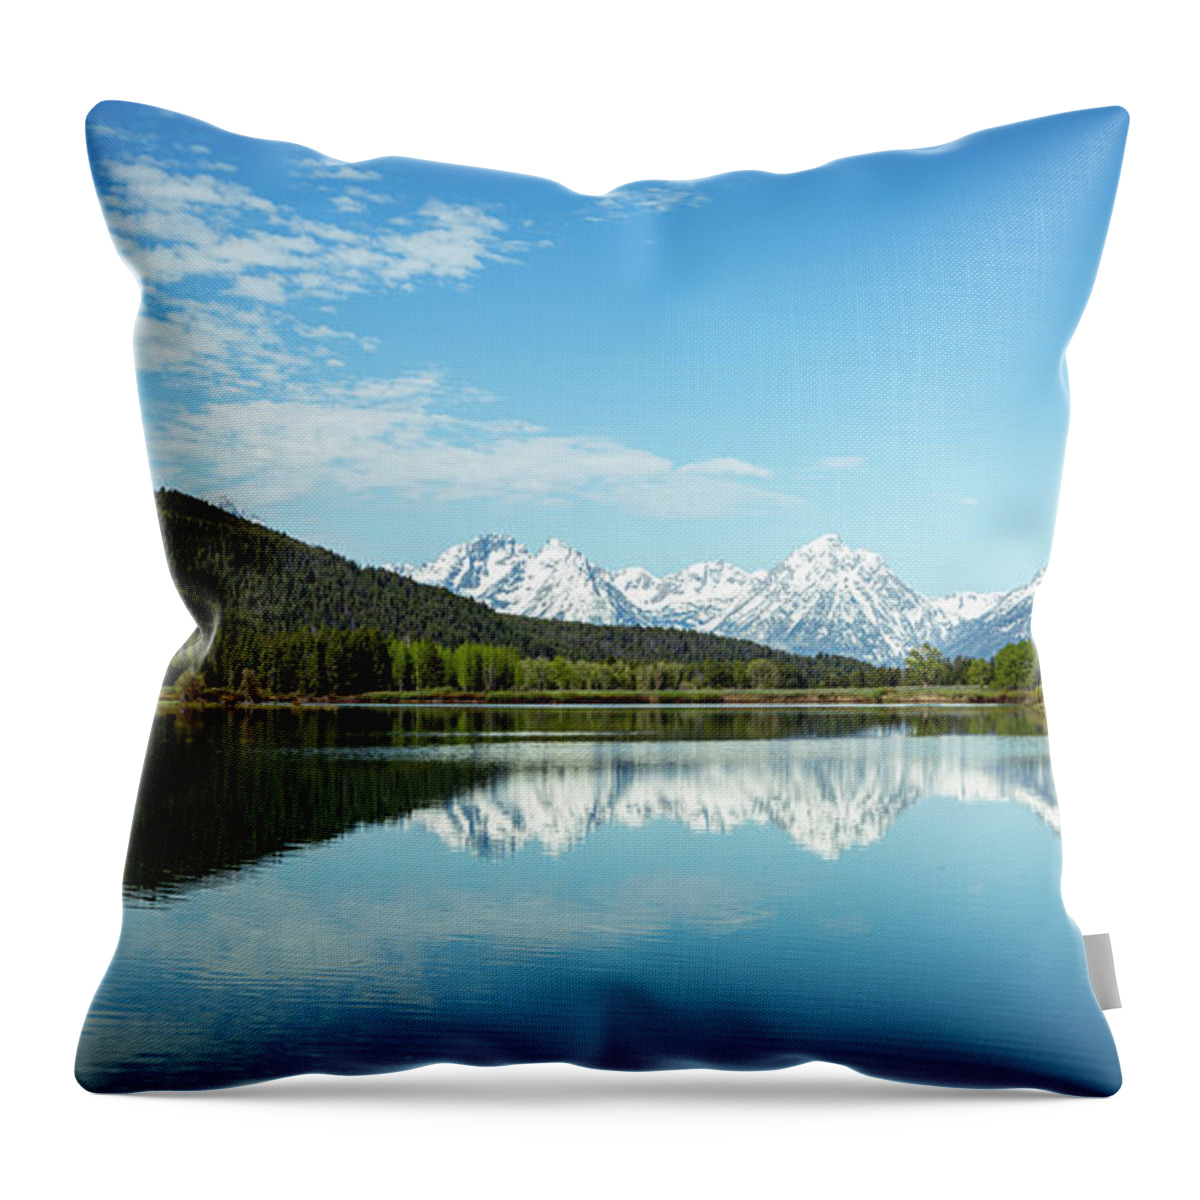 Landscape Throw Pillow featuring the photograph Oxbow Bend by David Lee